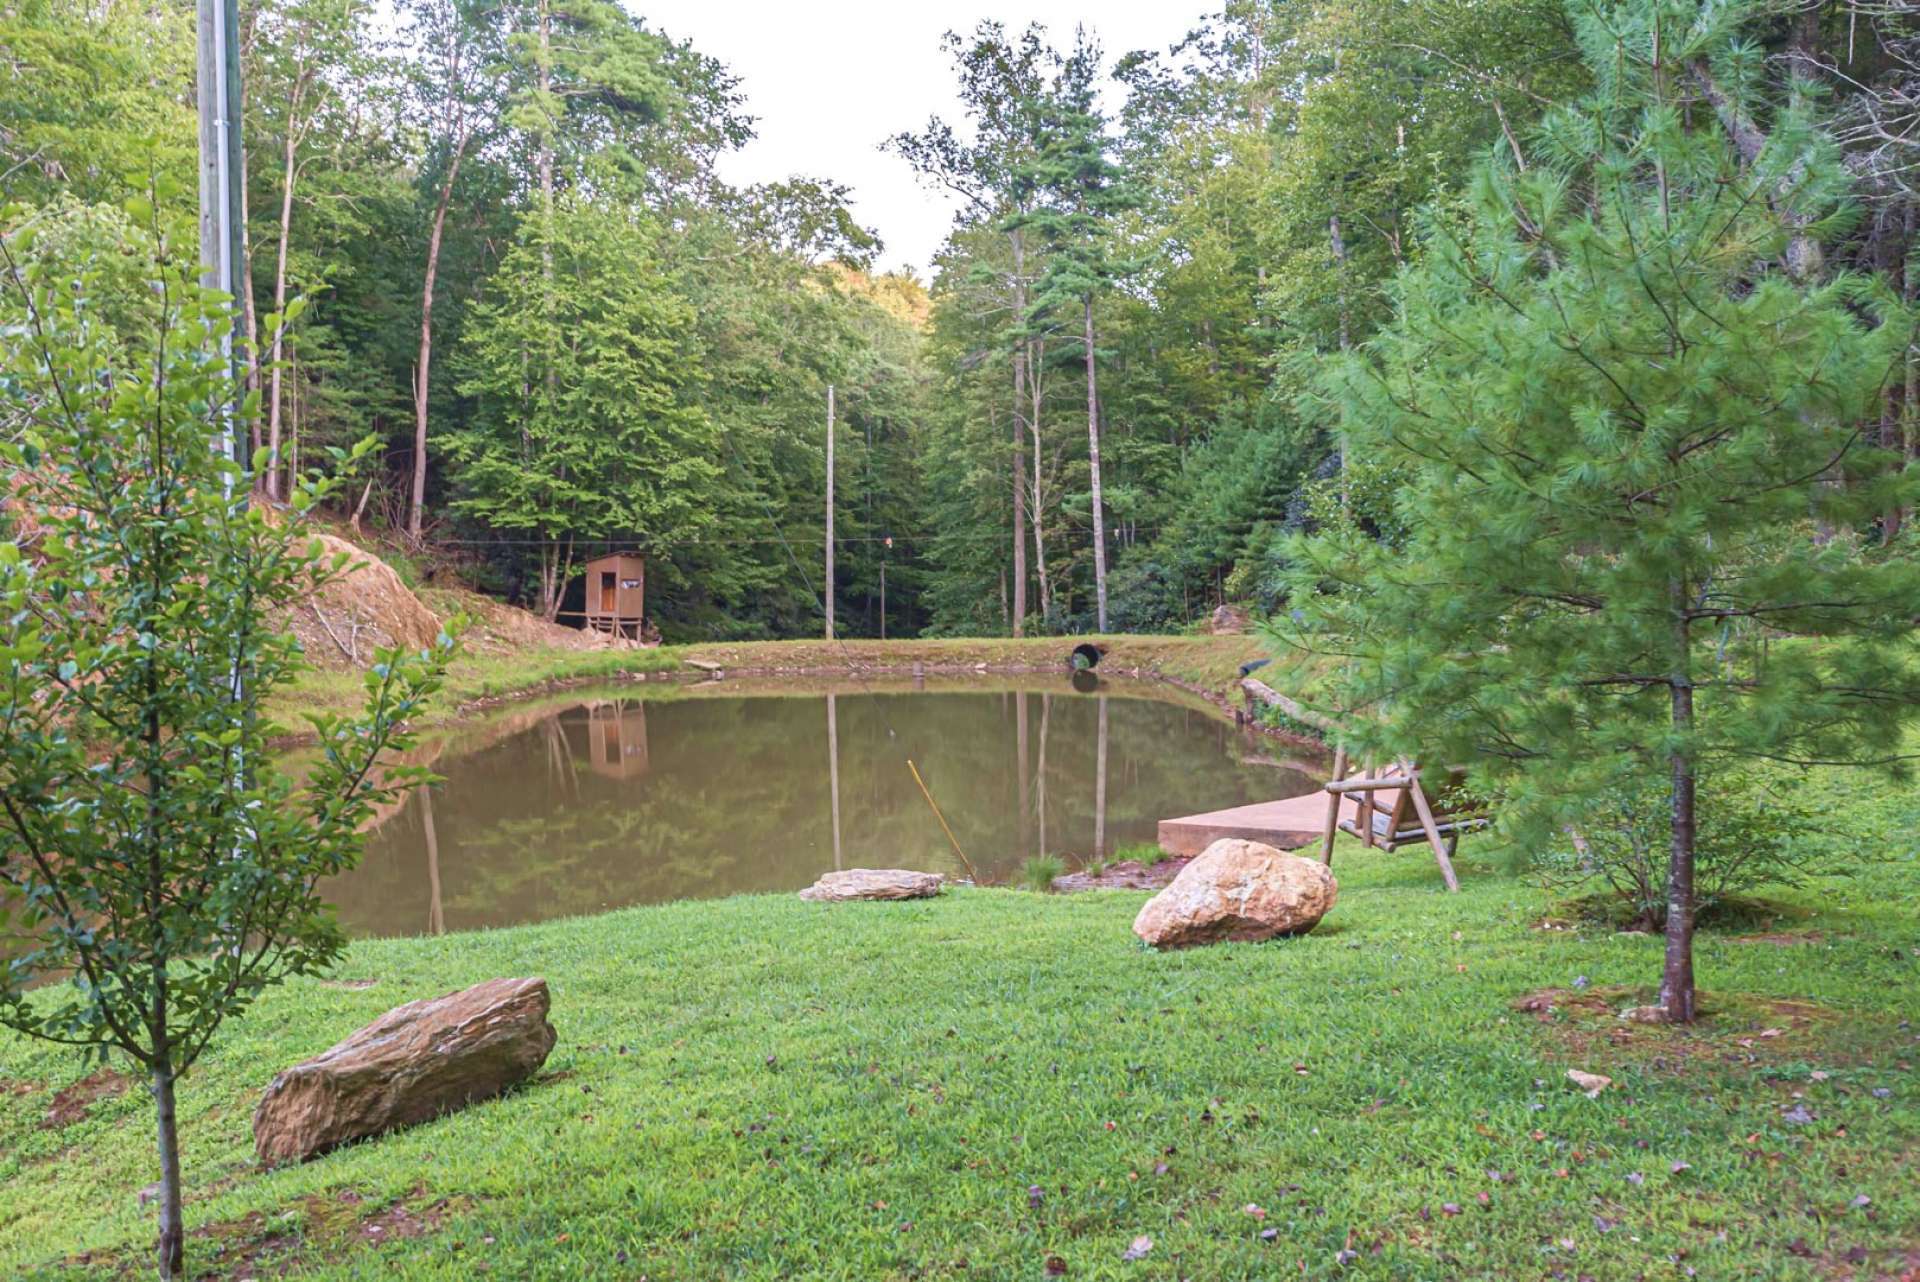 Spend the afternoon around the pond with a picnic basket and your fishing pole.